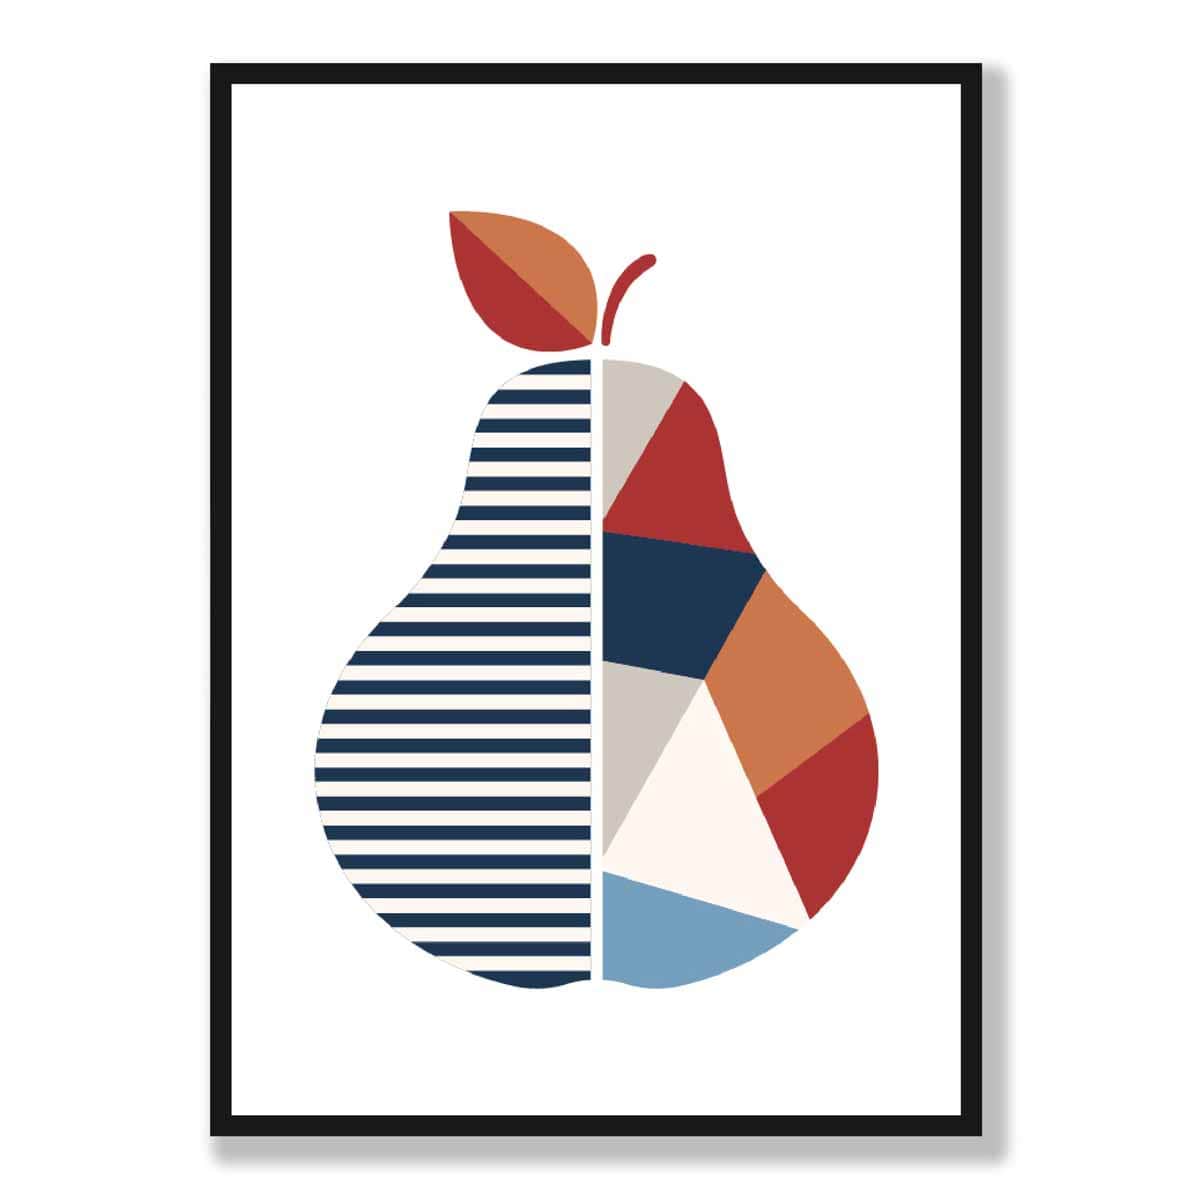 Geometric Fruit Poster of a Pear in Red Orange Blue